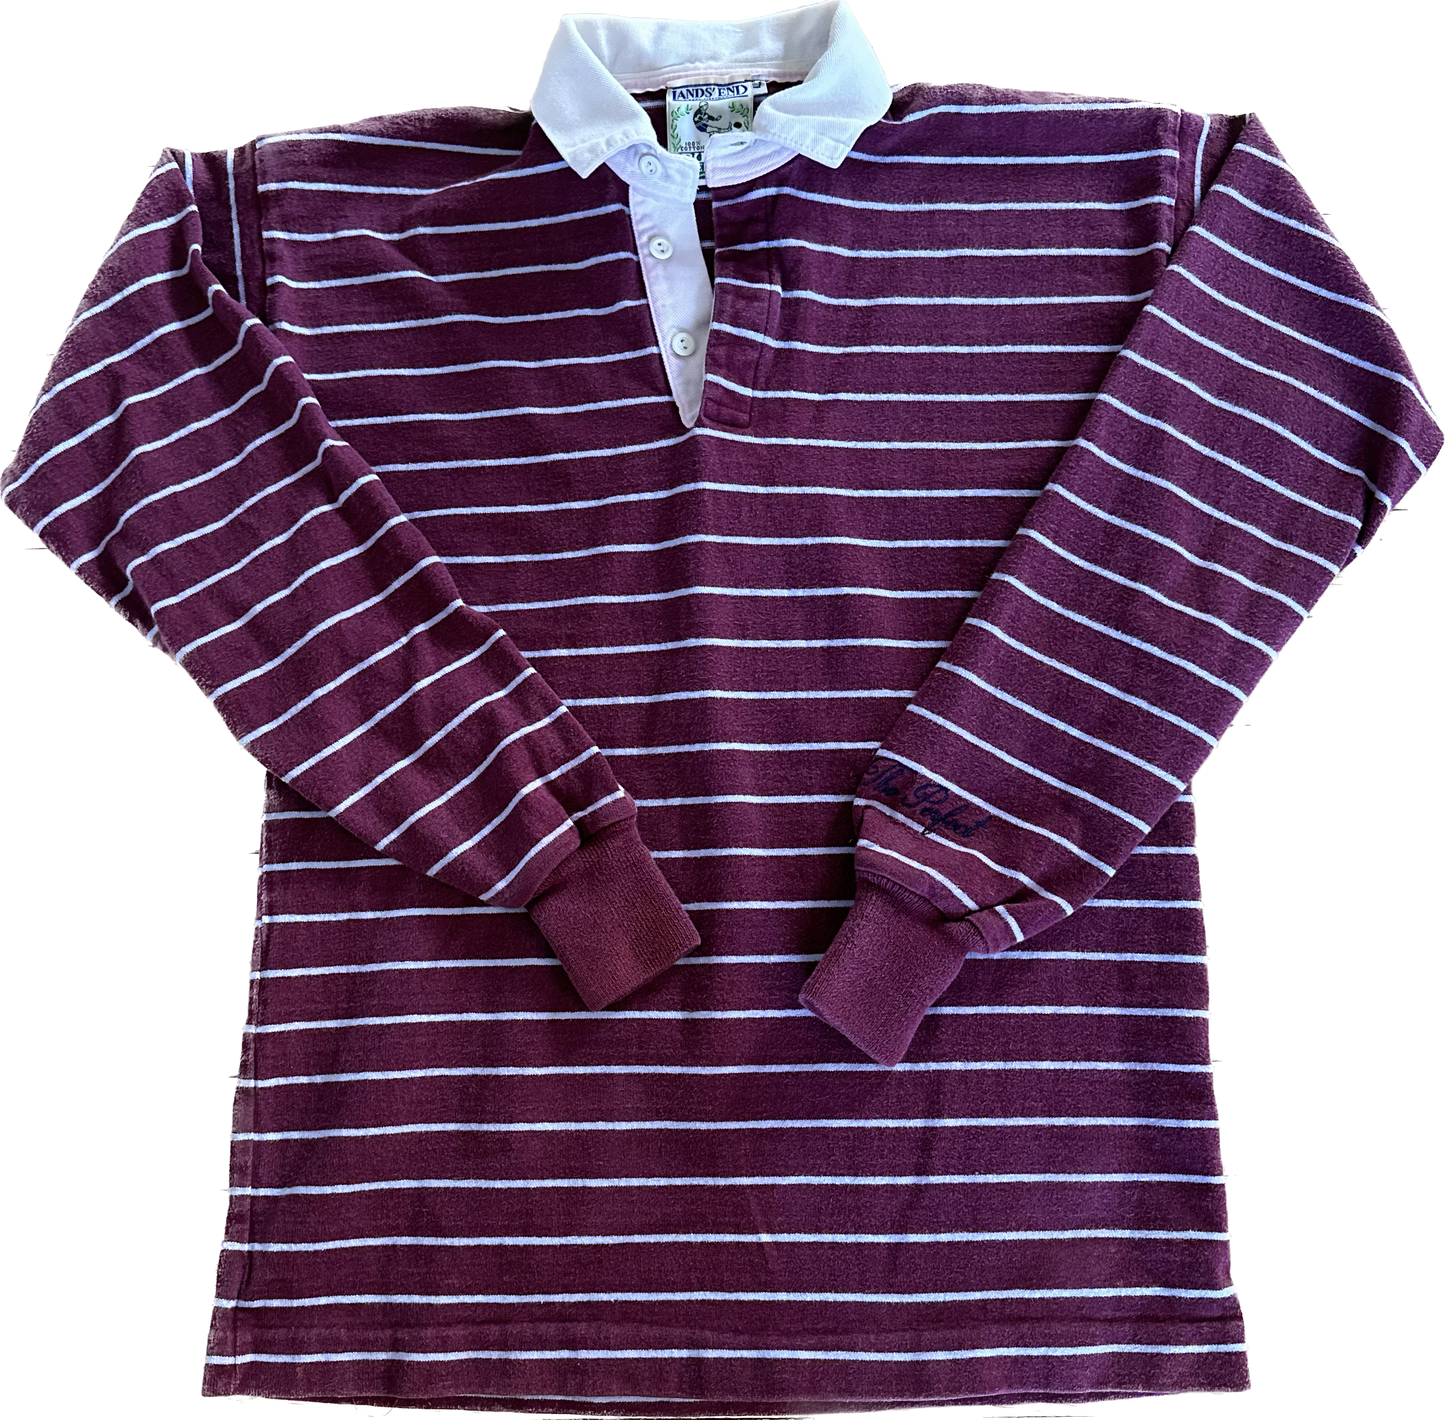 The Perfect Vintage Burgundy Rugby Shirt